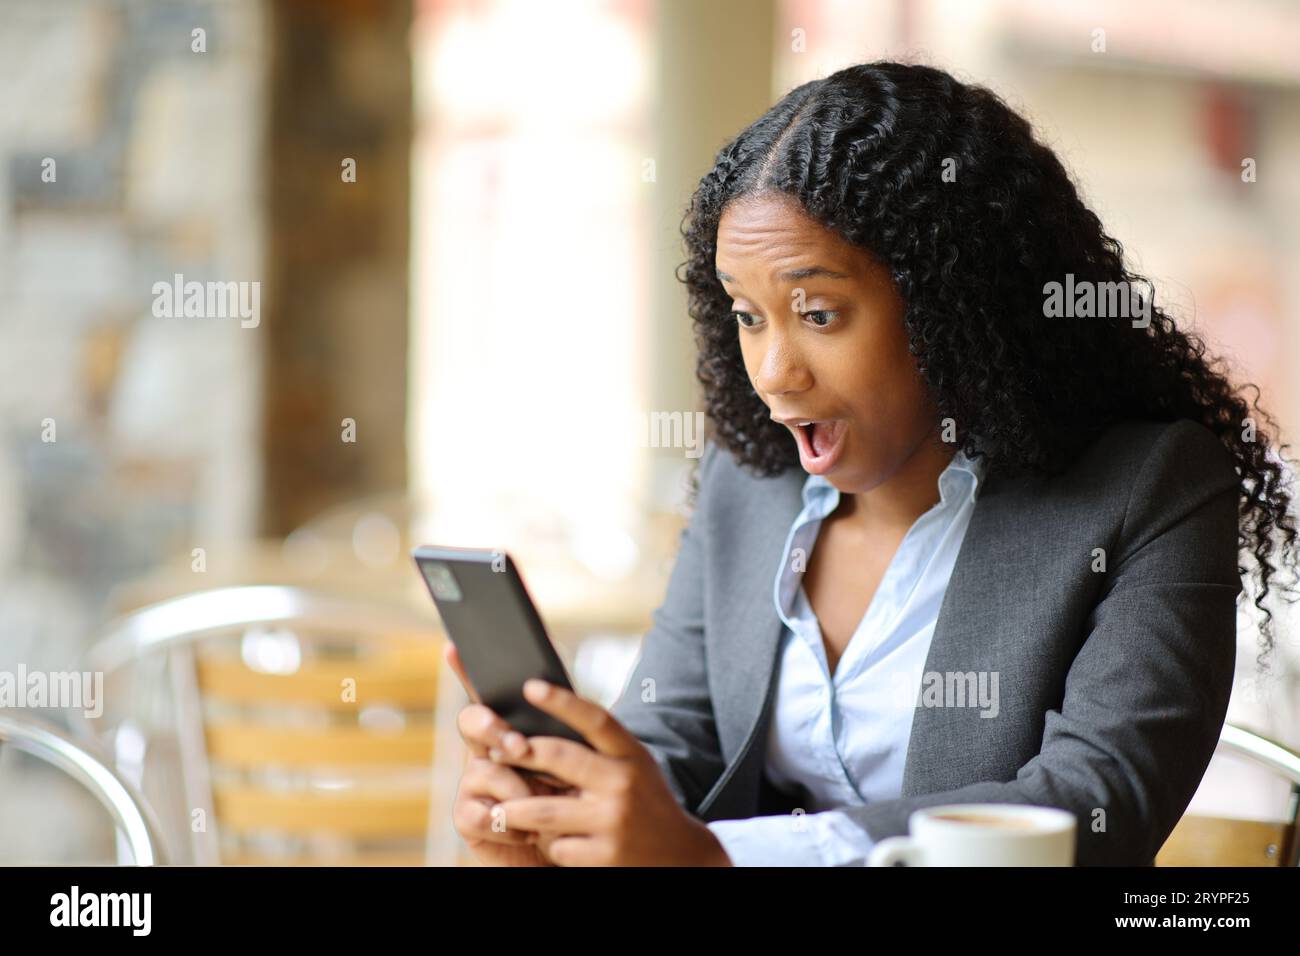 Amazed black executive checking smart phone in a bar terrace Stock Photo